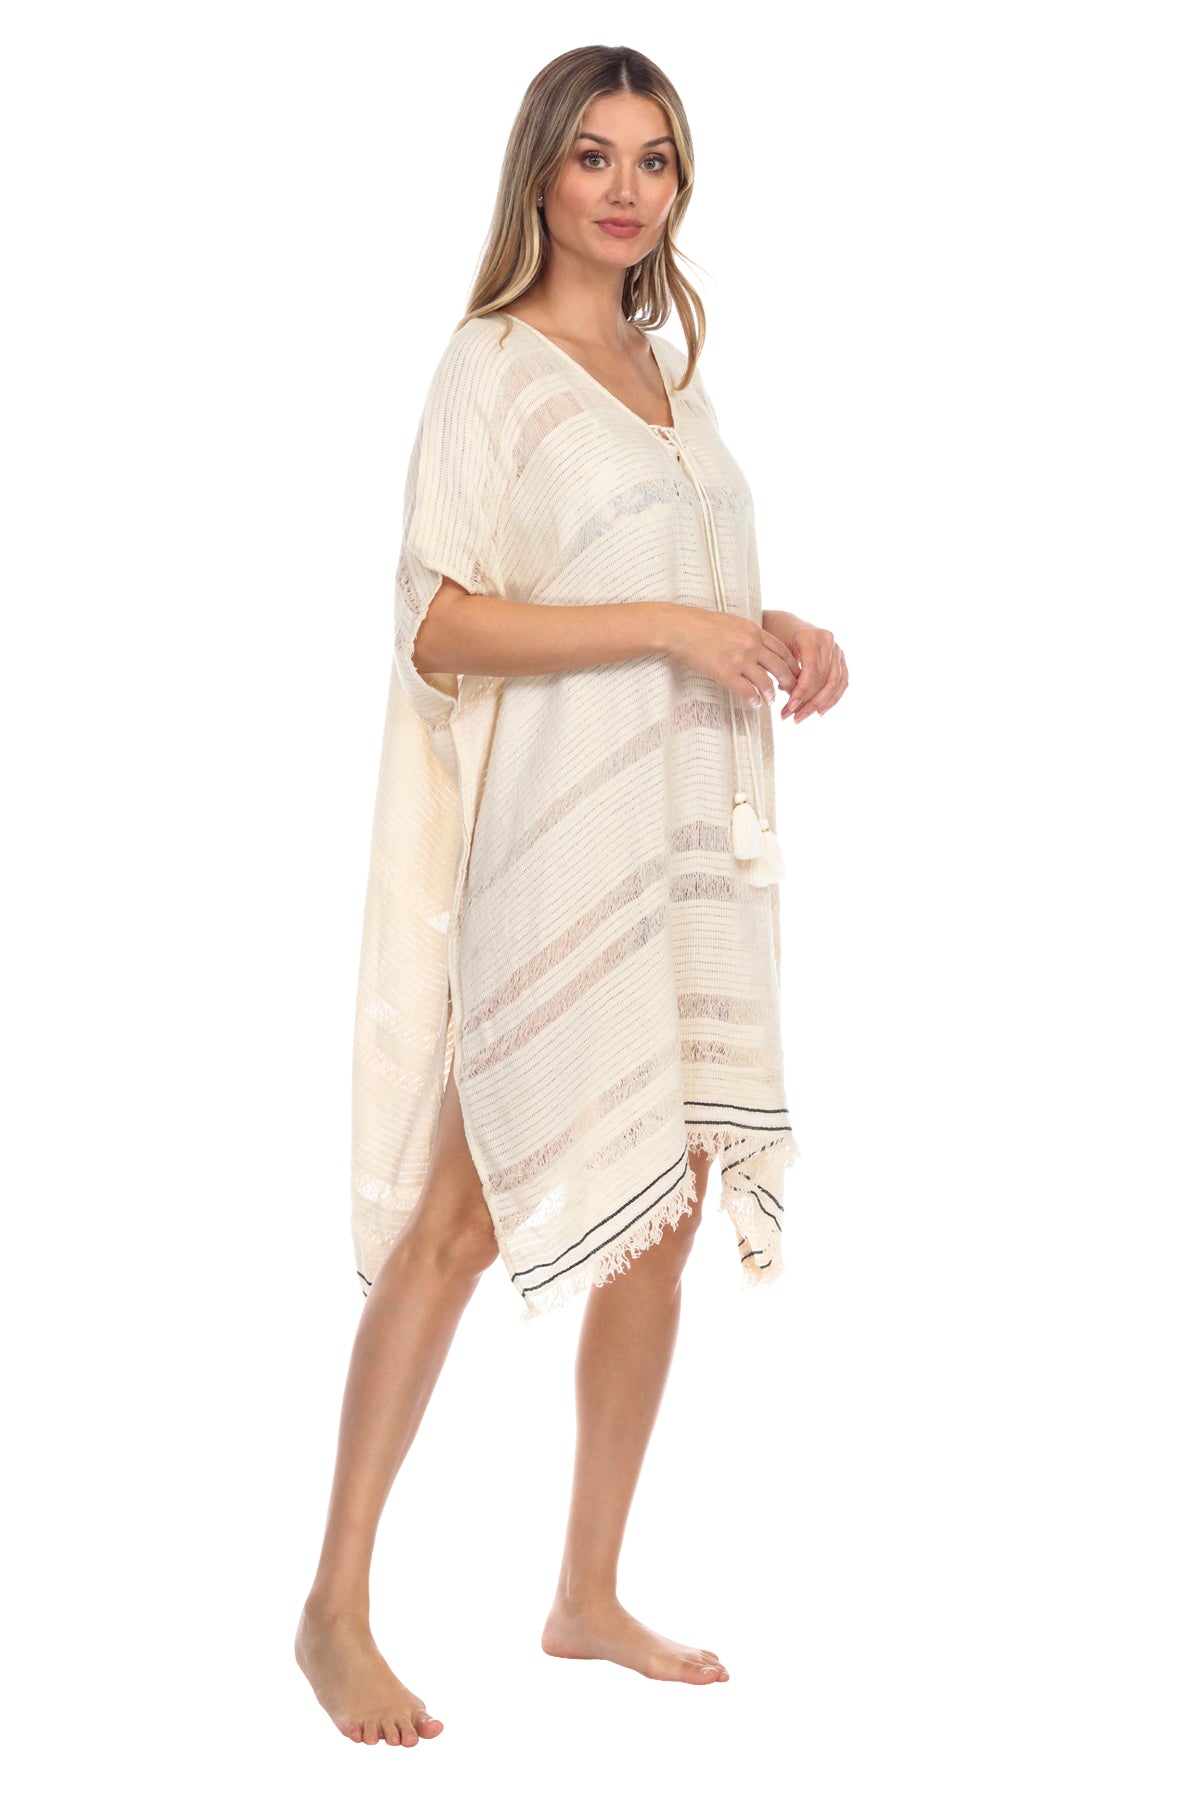 Annalyn Striped Lace Up Caftan Coverup